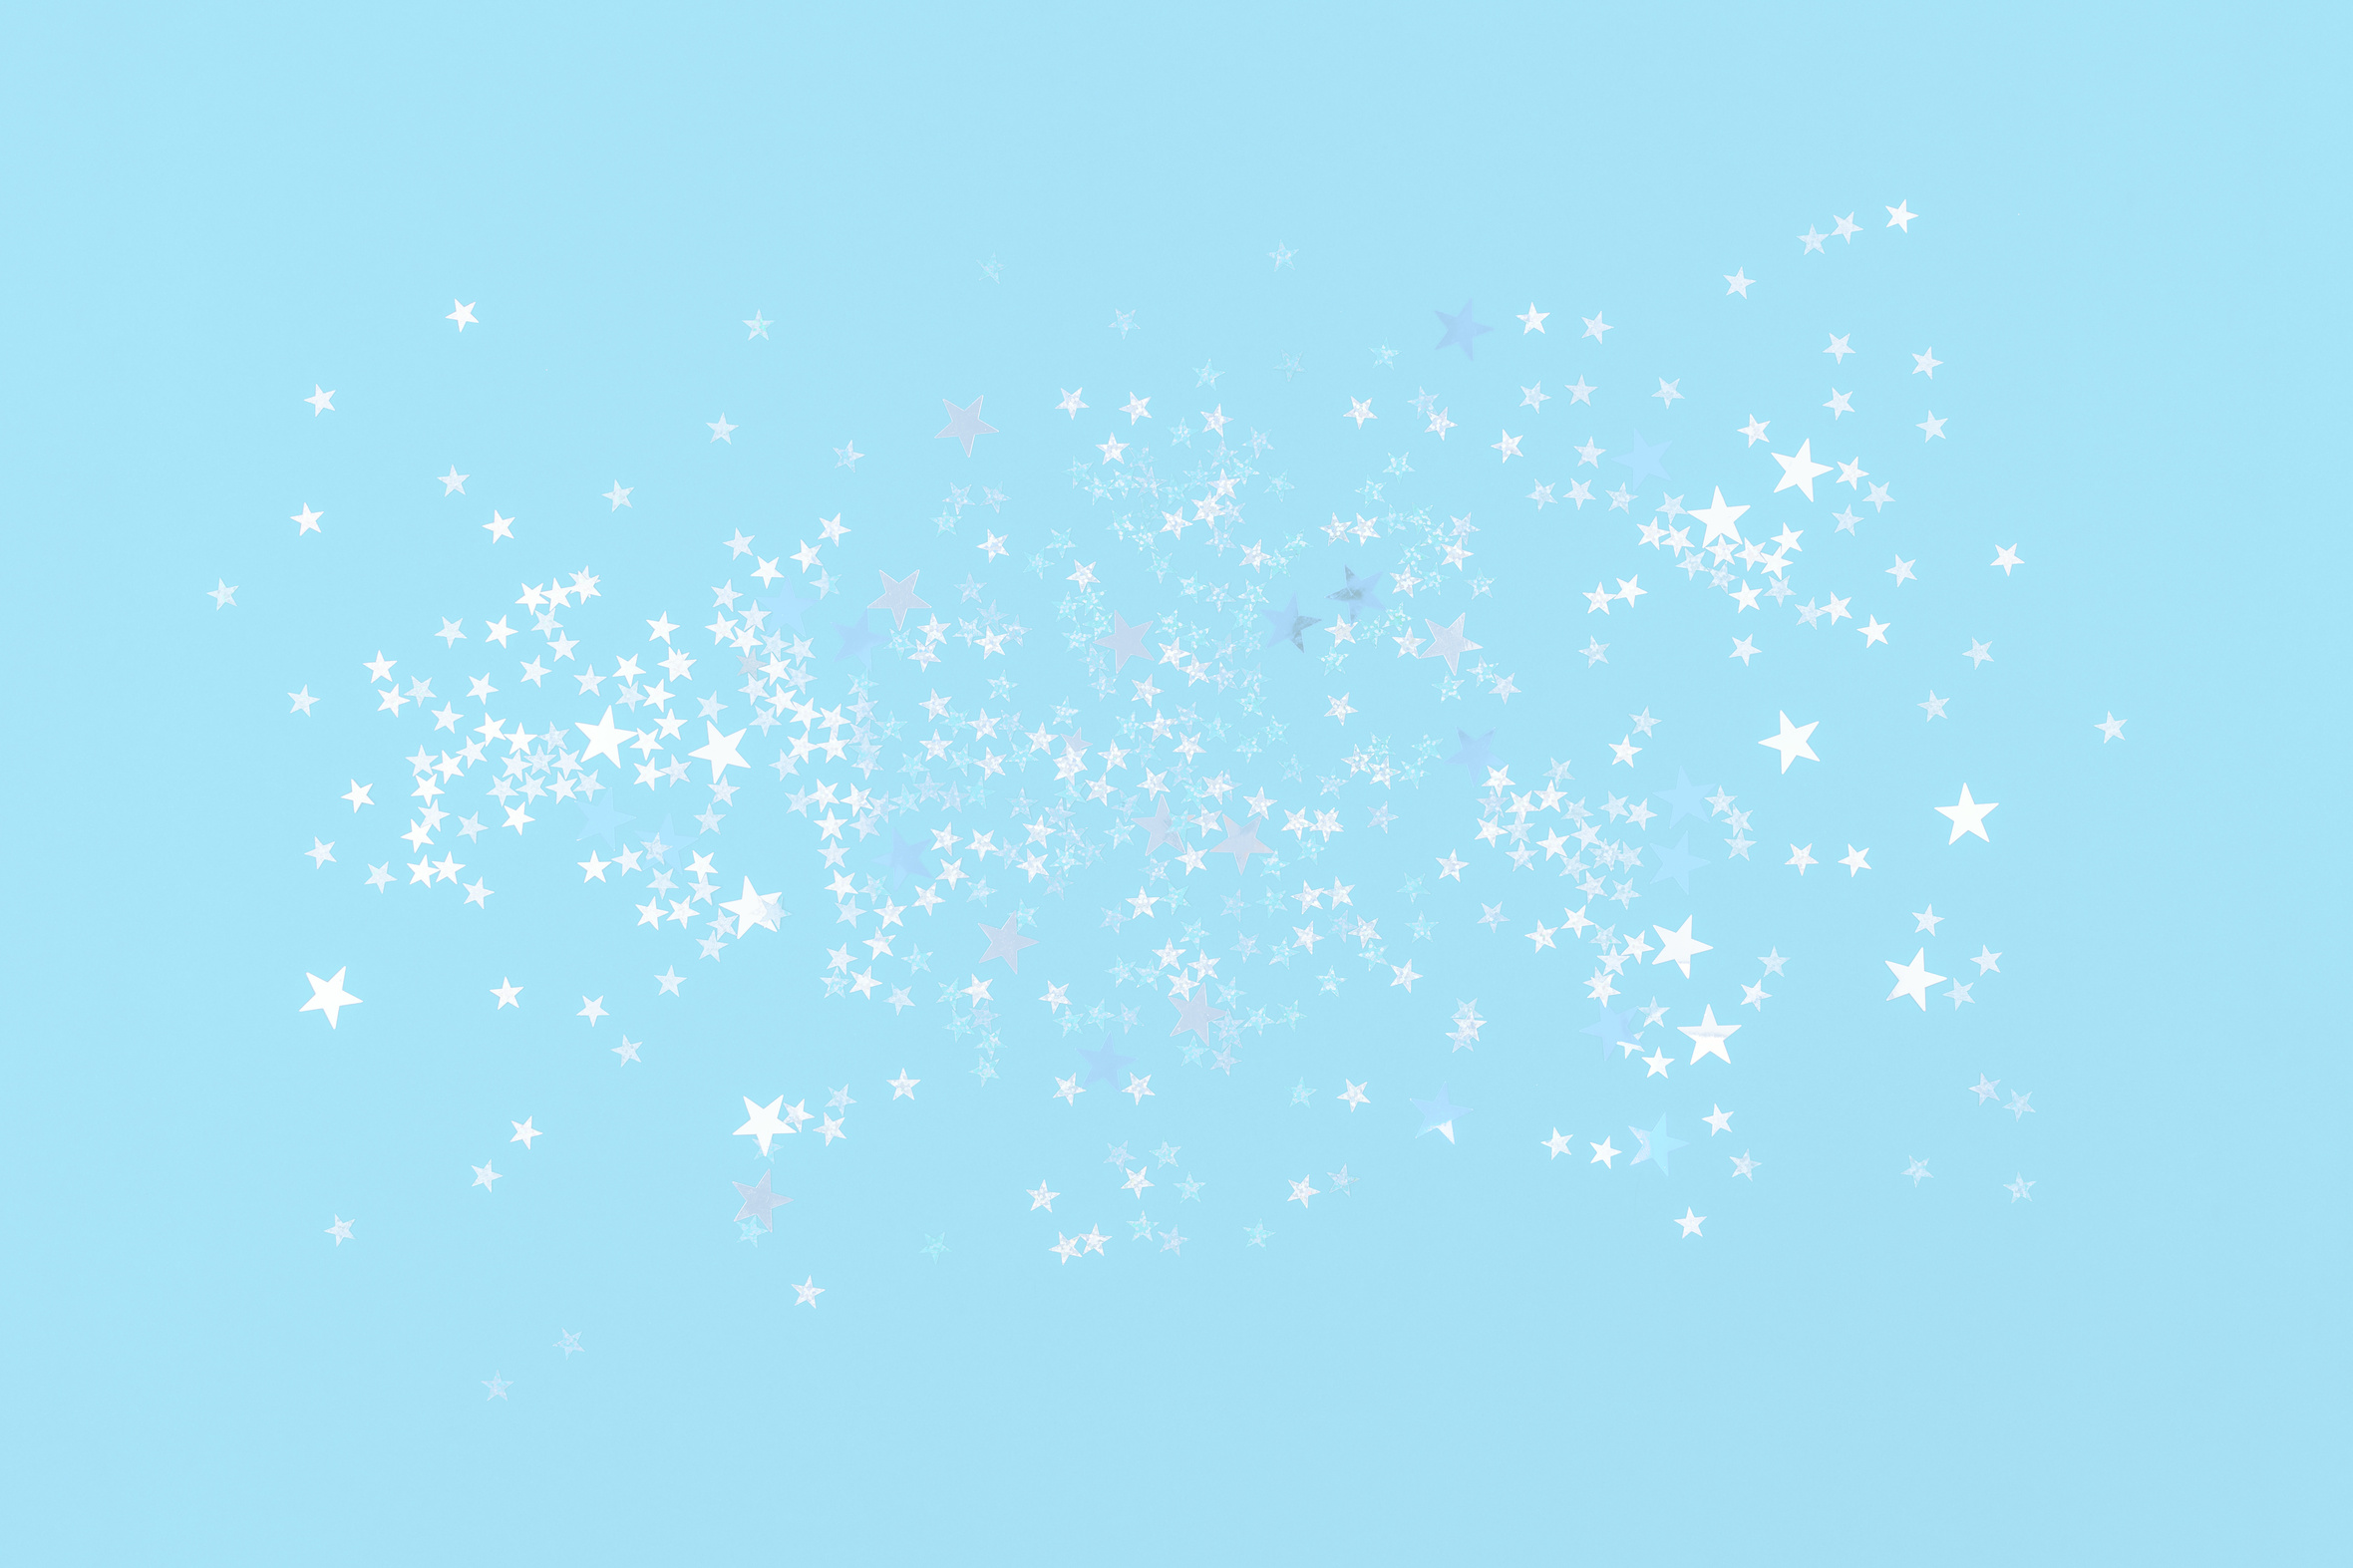 White and light blue holographic star glitter confetti background